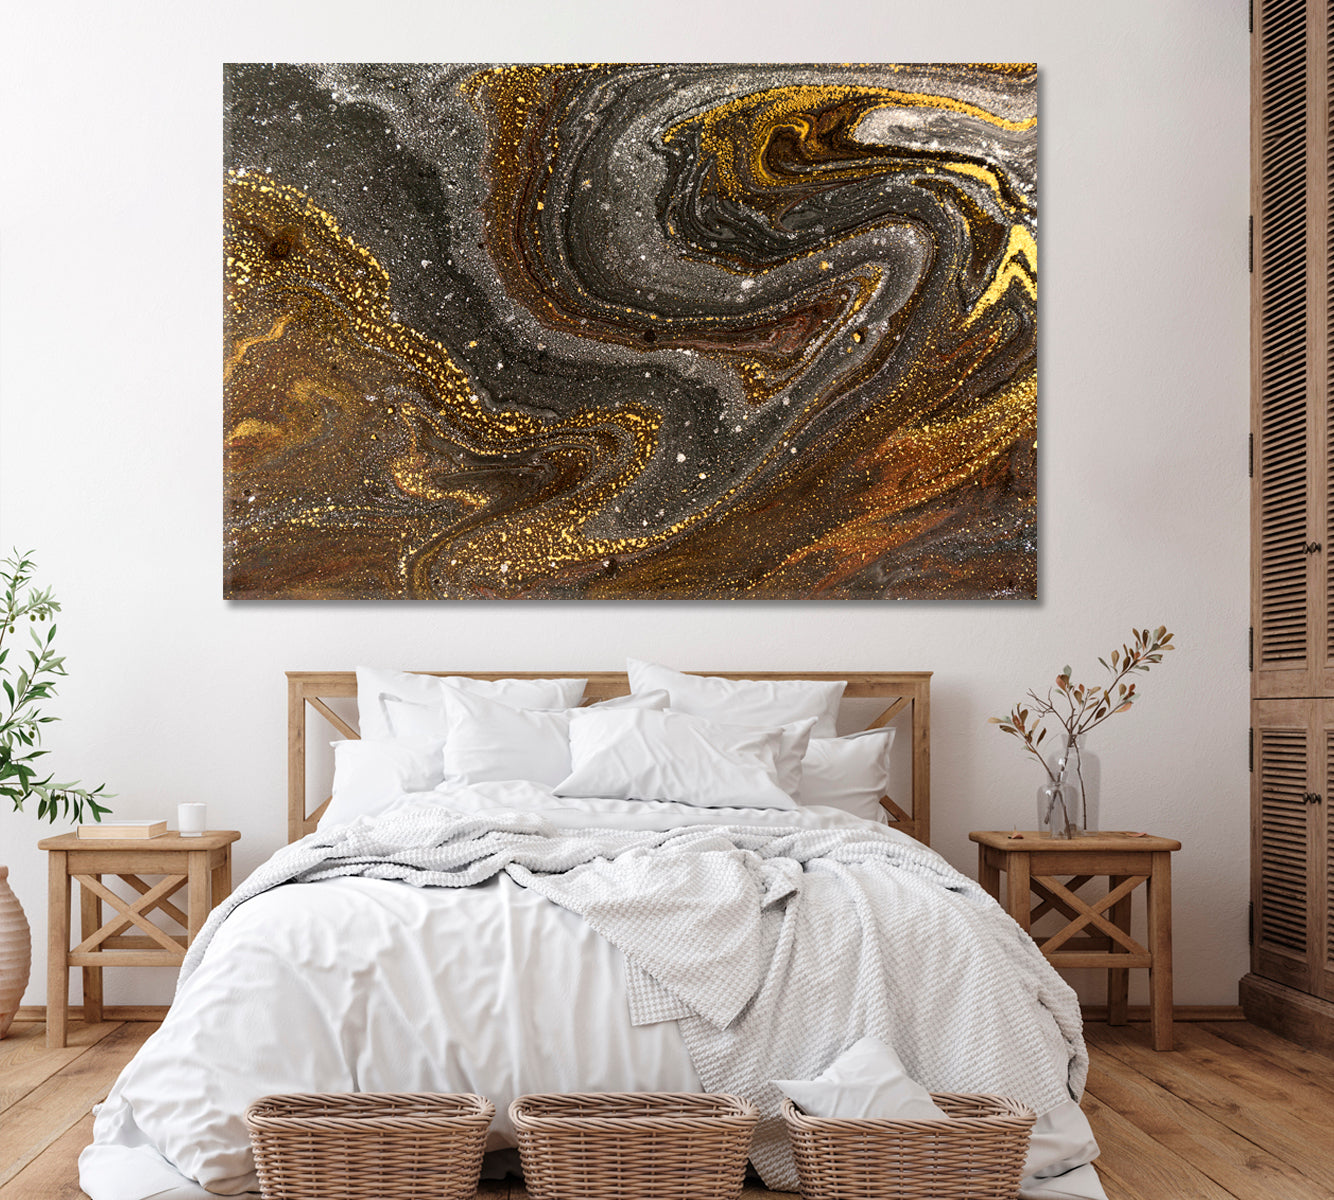 Abstract Marble Mixed Acrylic Paints Canvas Print ArtLexy 1 Panel 24"x16" inches 